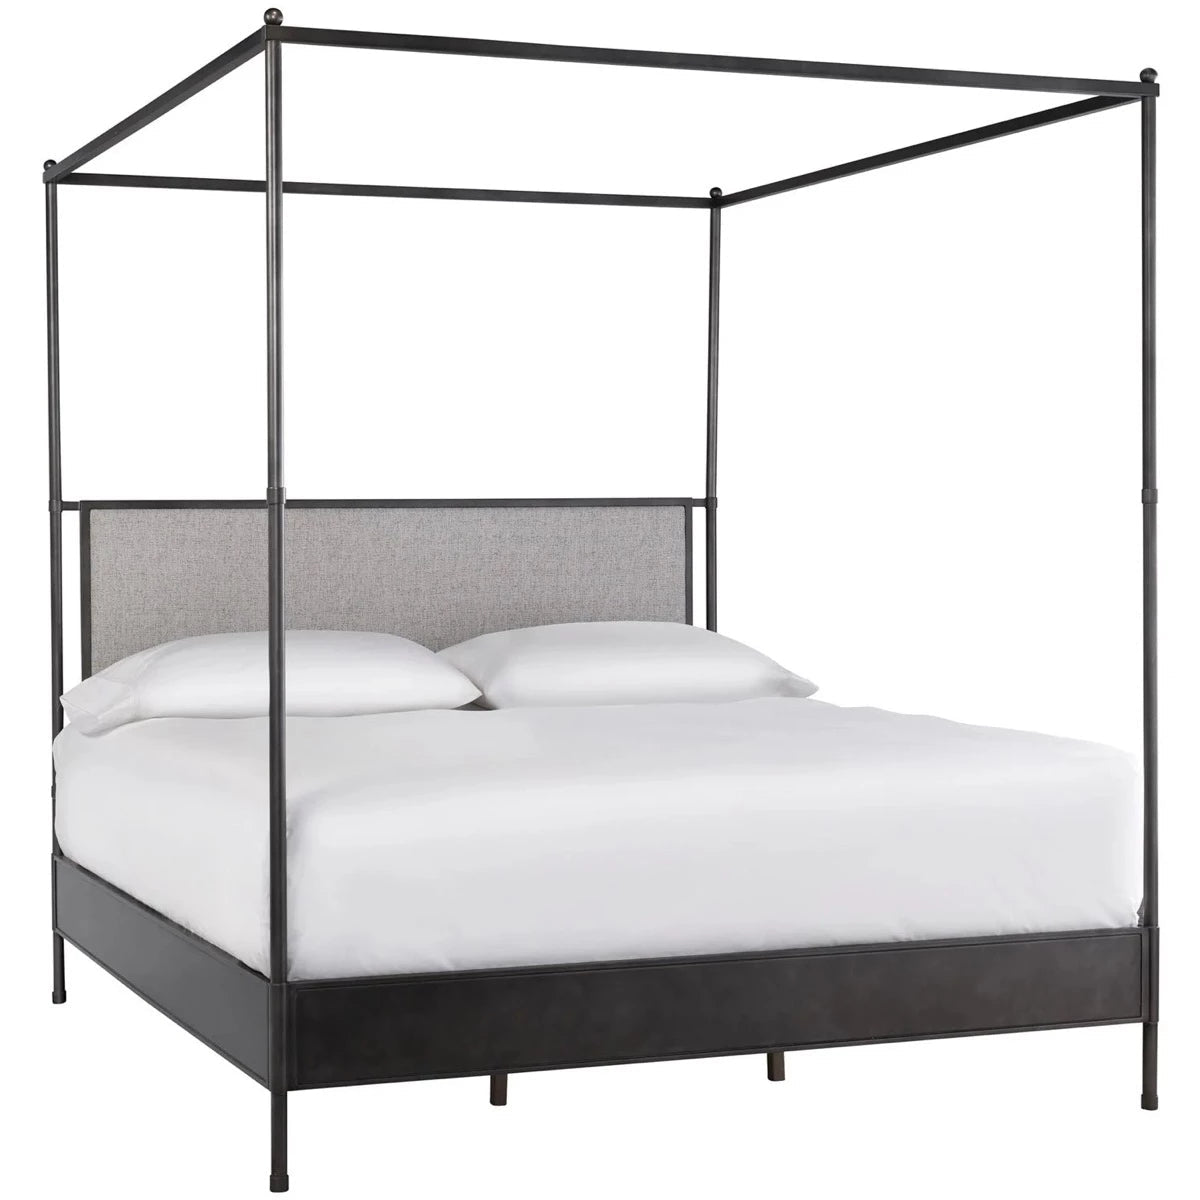 Midtown Bed Frame - King. Front view.